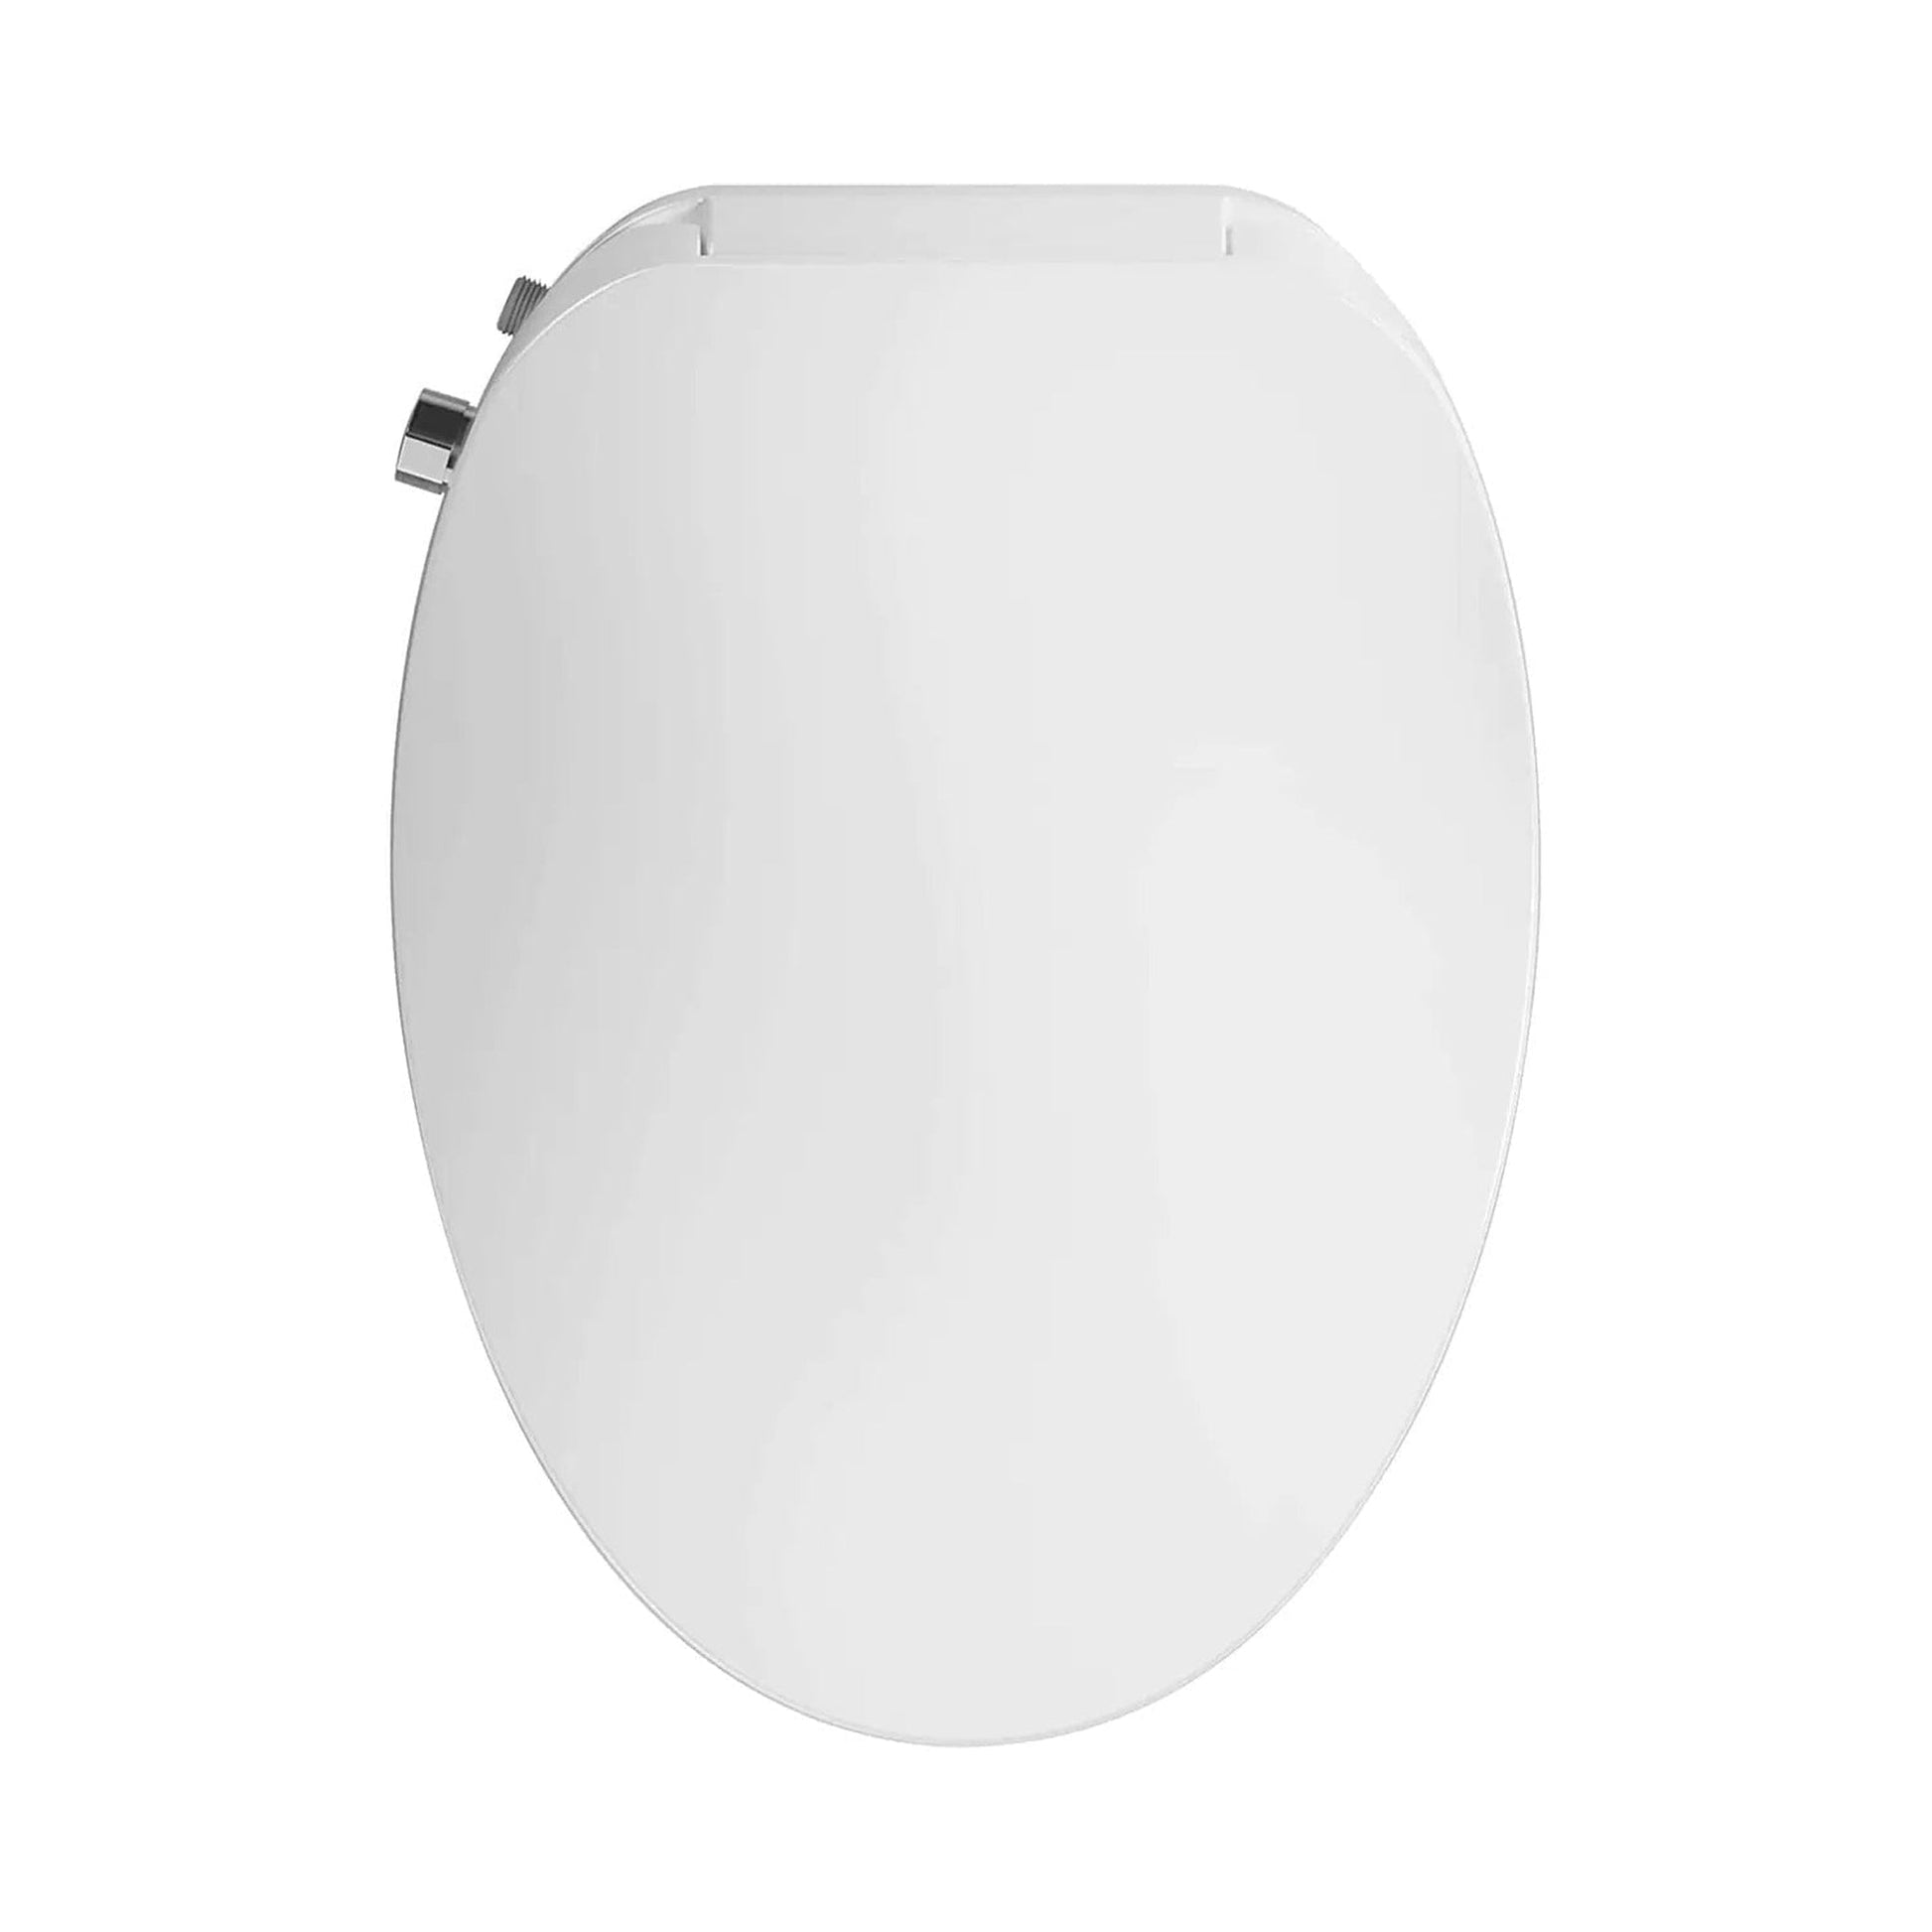 https://usbathstore.com/cdn/shop/products/Aim-to-Wash-20-Elongated-White-Electric-Smart-Bidet-Toilet-Seat-With-Knob-Control-Operation-2.jpg?v=1669836916&width=1946